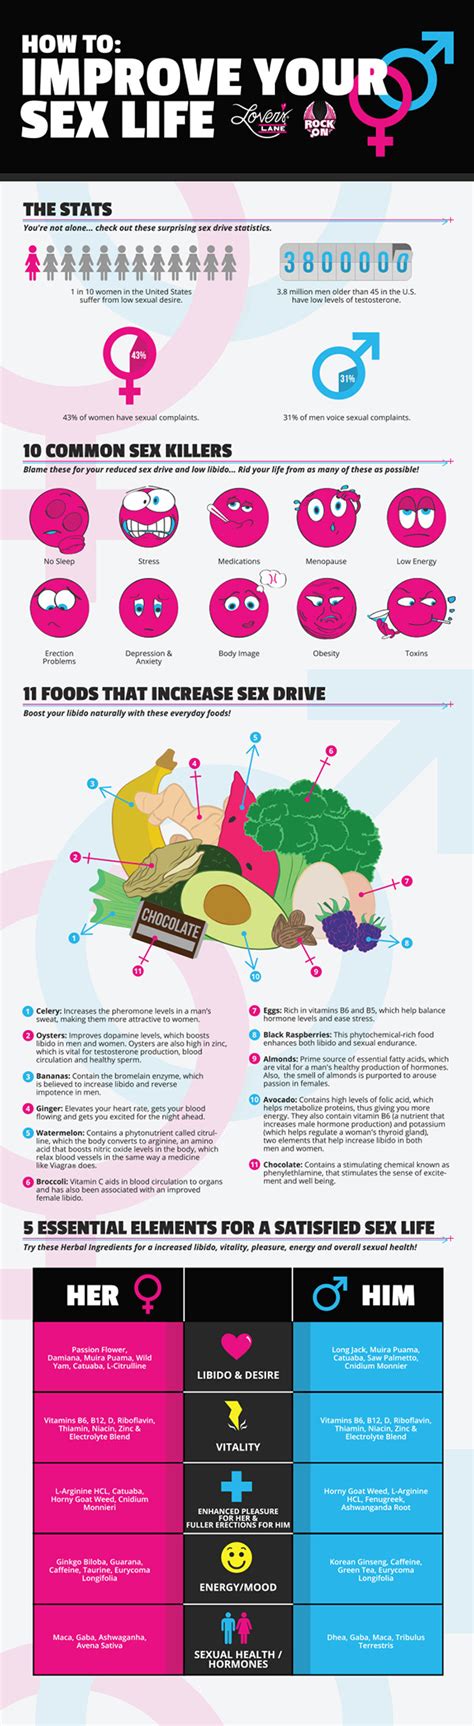 how to improve your sex life infographic visualistan 17316 hot sex picture